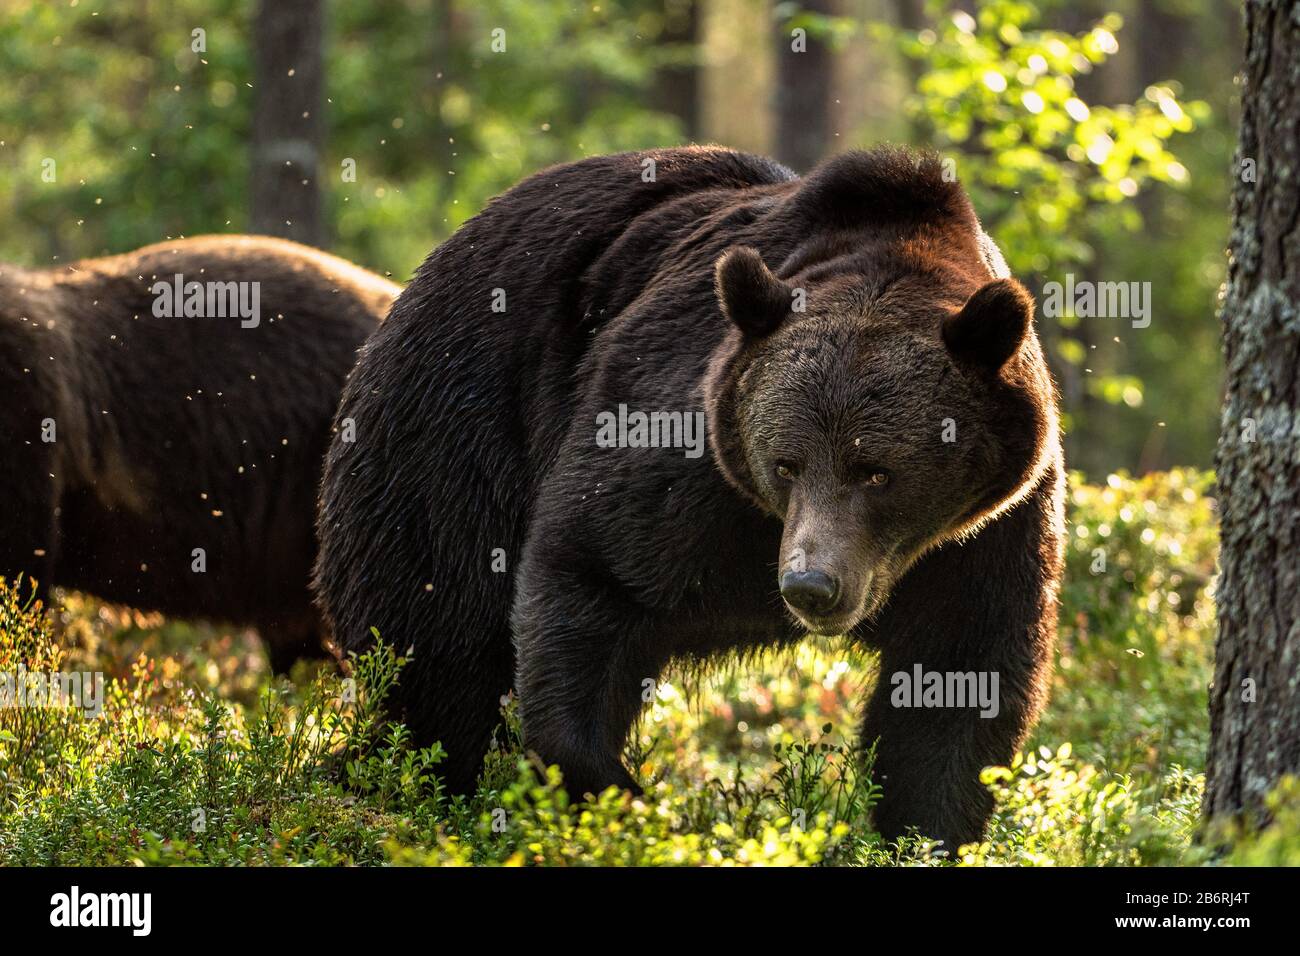 Big bear with backlit, forest in background. Adult Male of Brown bear in the summer forest. Scientific name: Ursus arctos. Natural habitat. Stock Photo